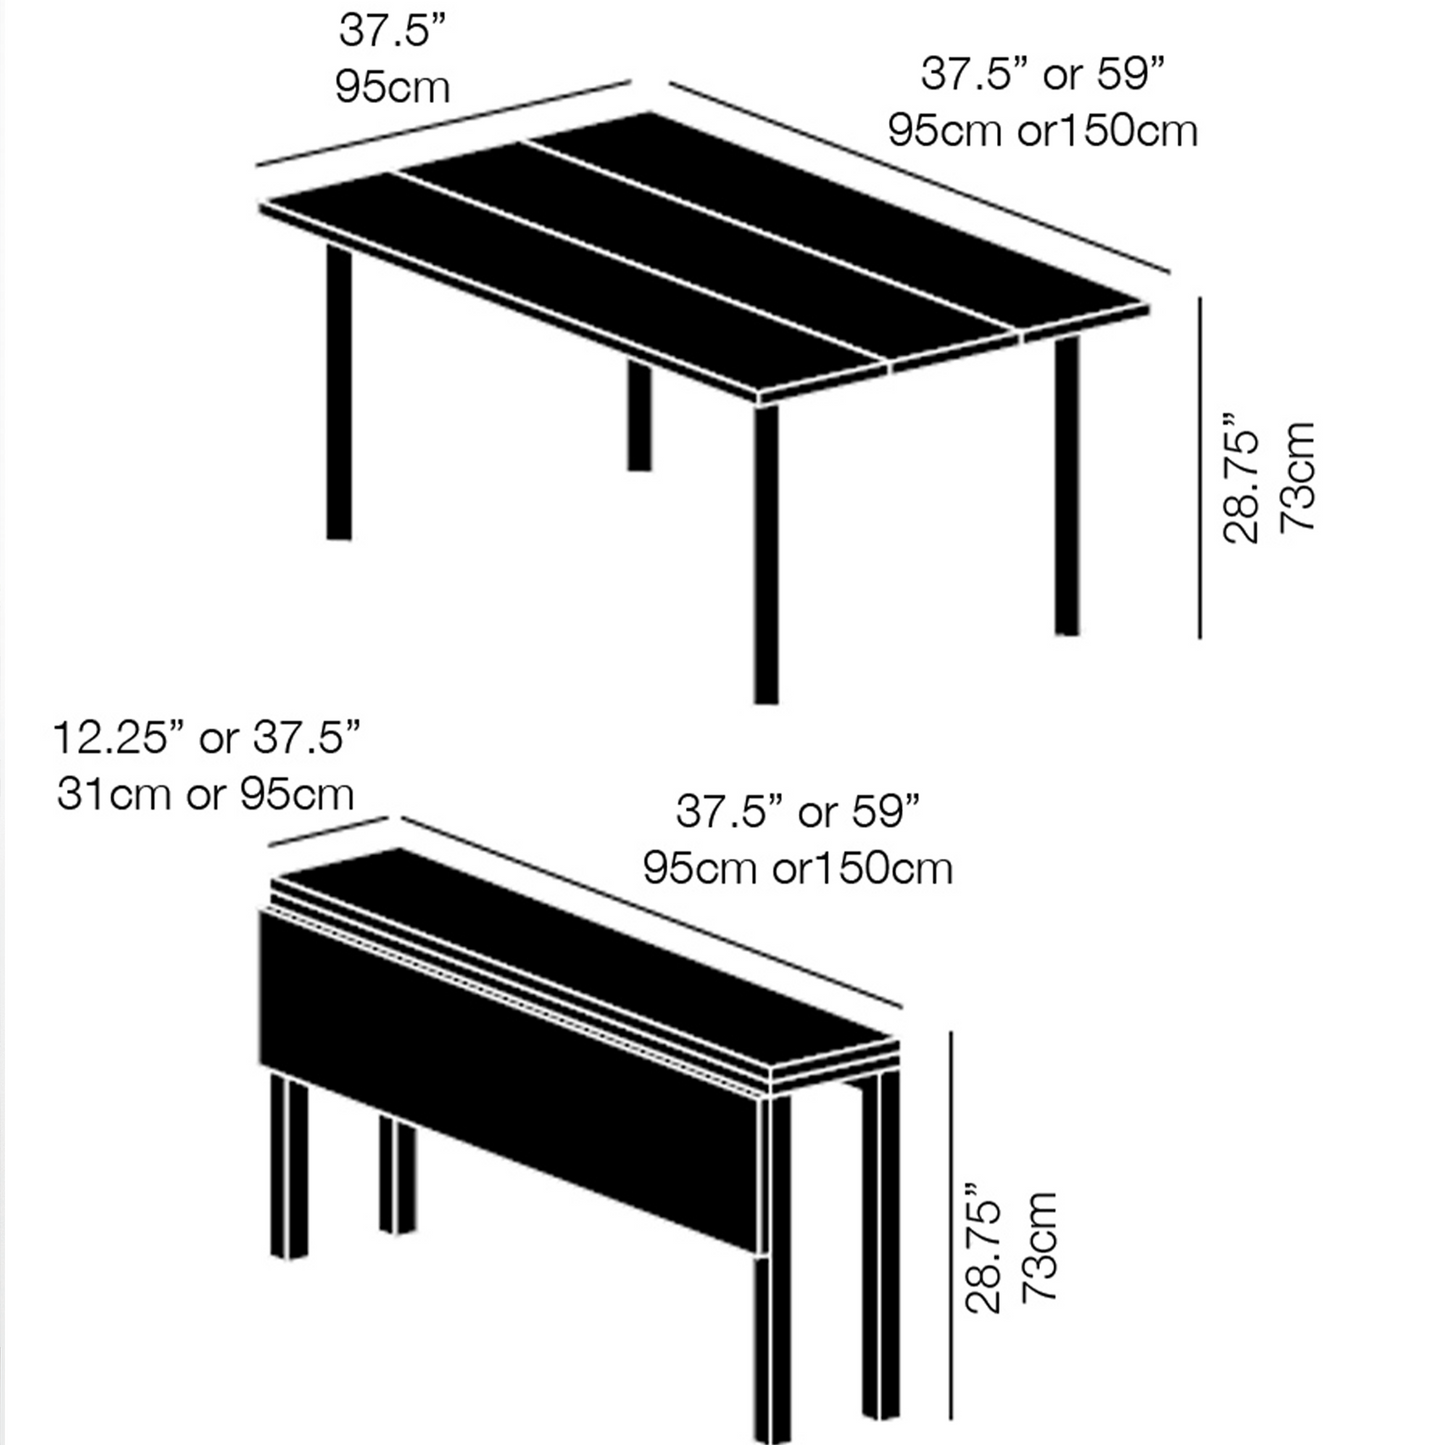 Console table technical drawing with dimensions.